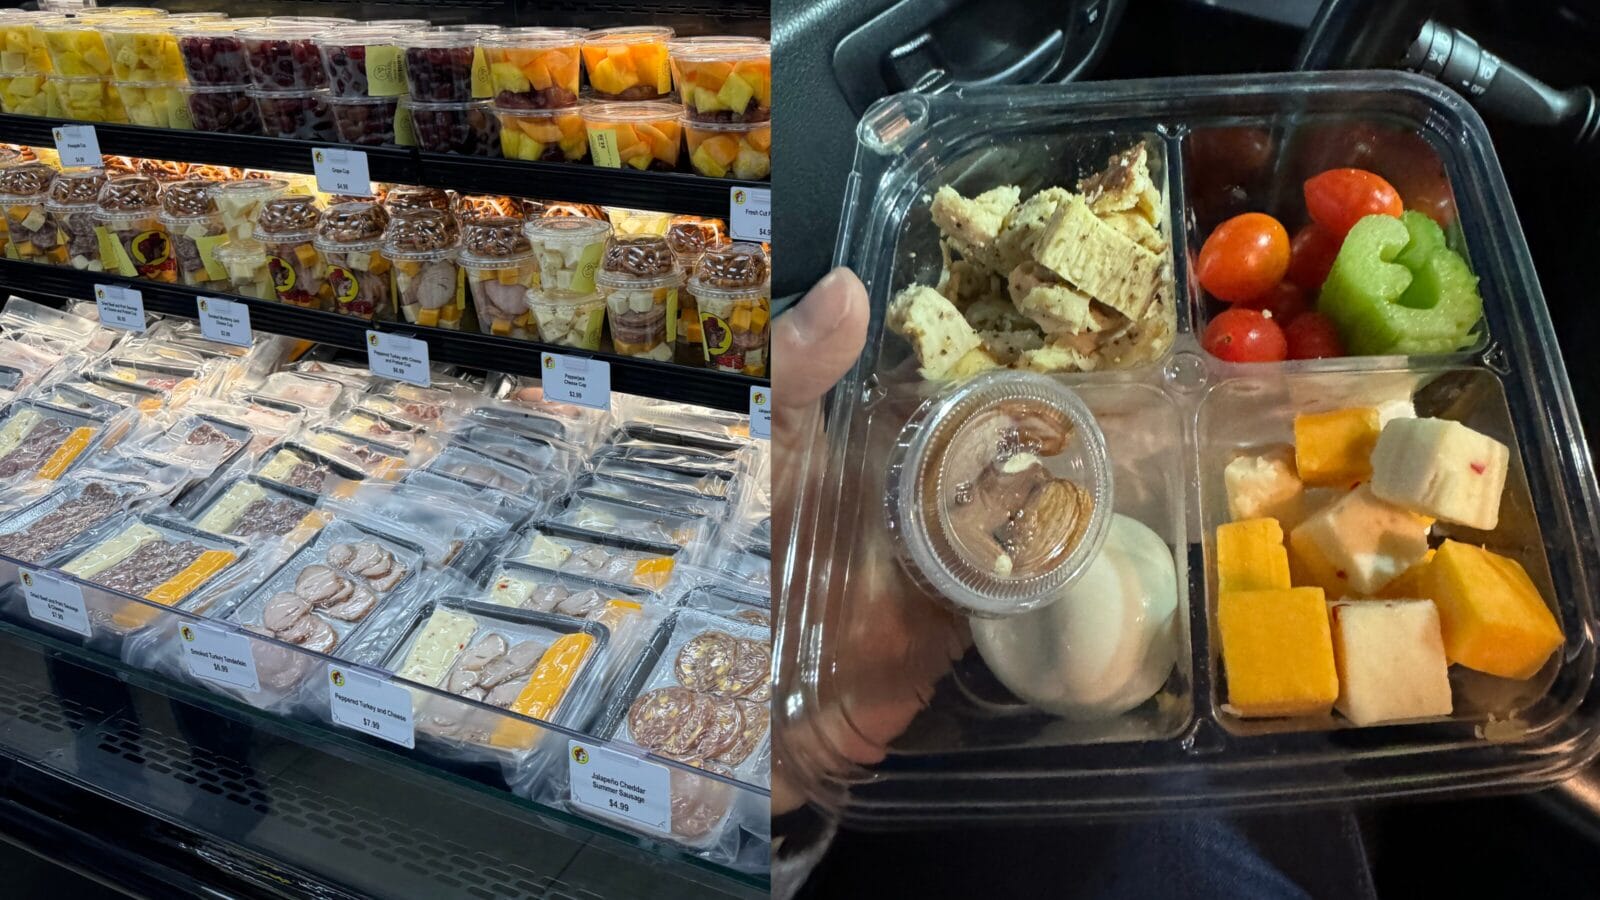 <p>If you are looking for healthy road trip snacks, the refrigerator “islands” contain fresh veggies and dip, cold cuts of meat, cheese cubes, hard boiled eggs and special Keto snack boxes. These are perfect for grab and go when you are on a diet. </p>